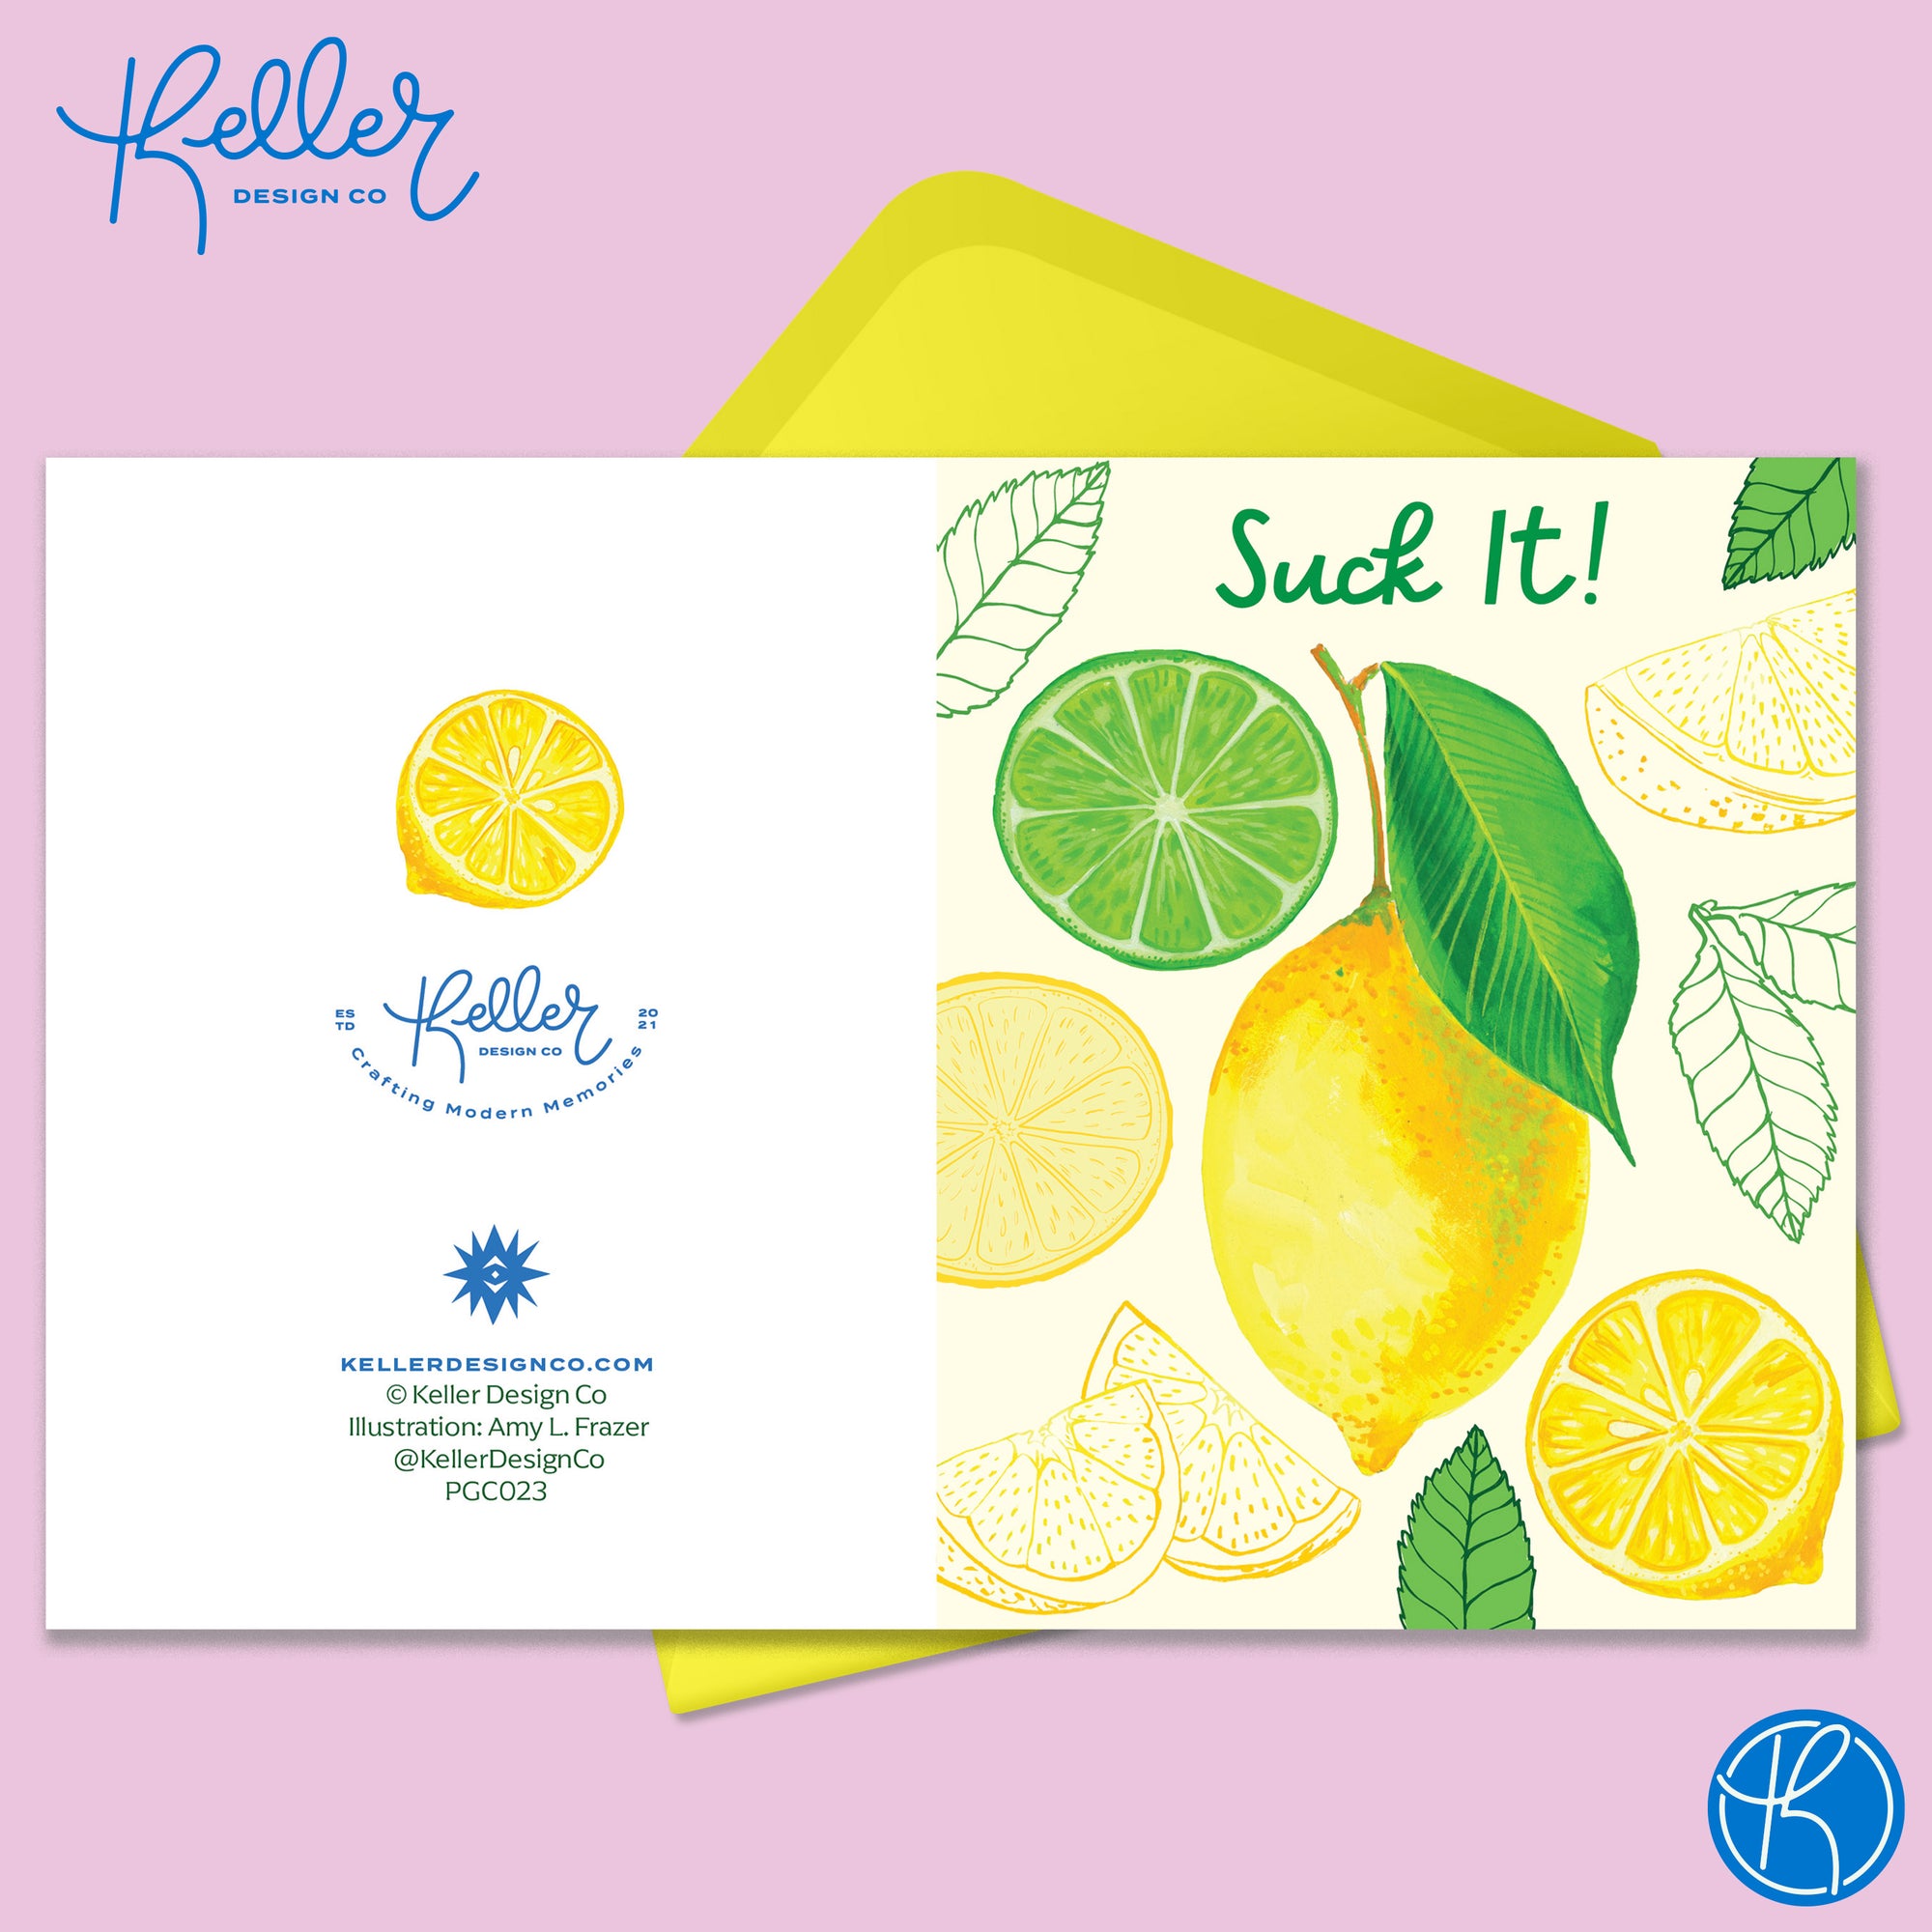 Paper Greeting card with the image of various lemons- a whole lemon in the center surrounded by cut lemons and green leaves and one cut lime  on a cream background. Text says Suck It! With a yellow envelope. On a lavender background.